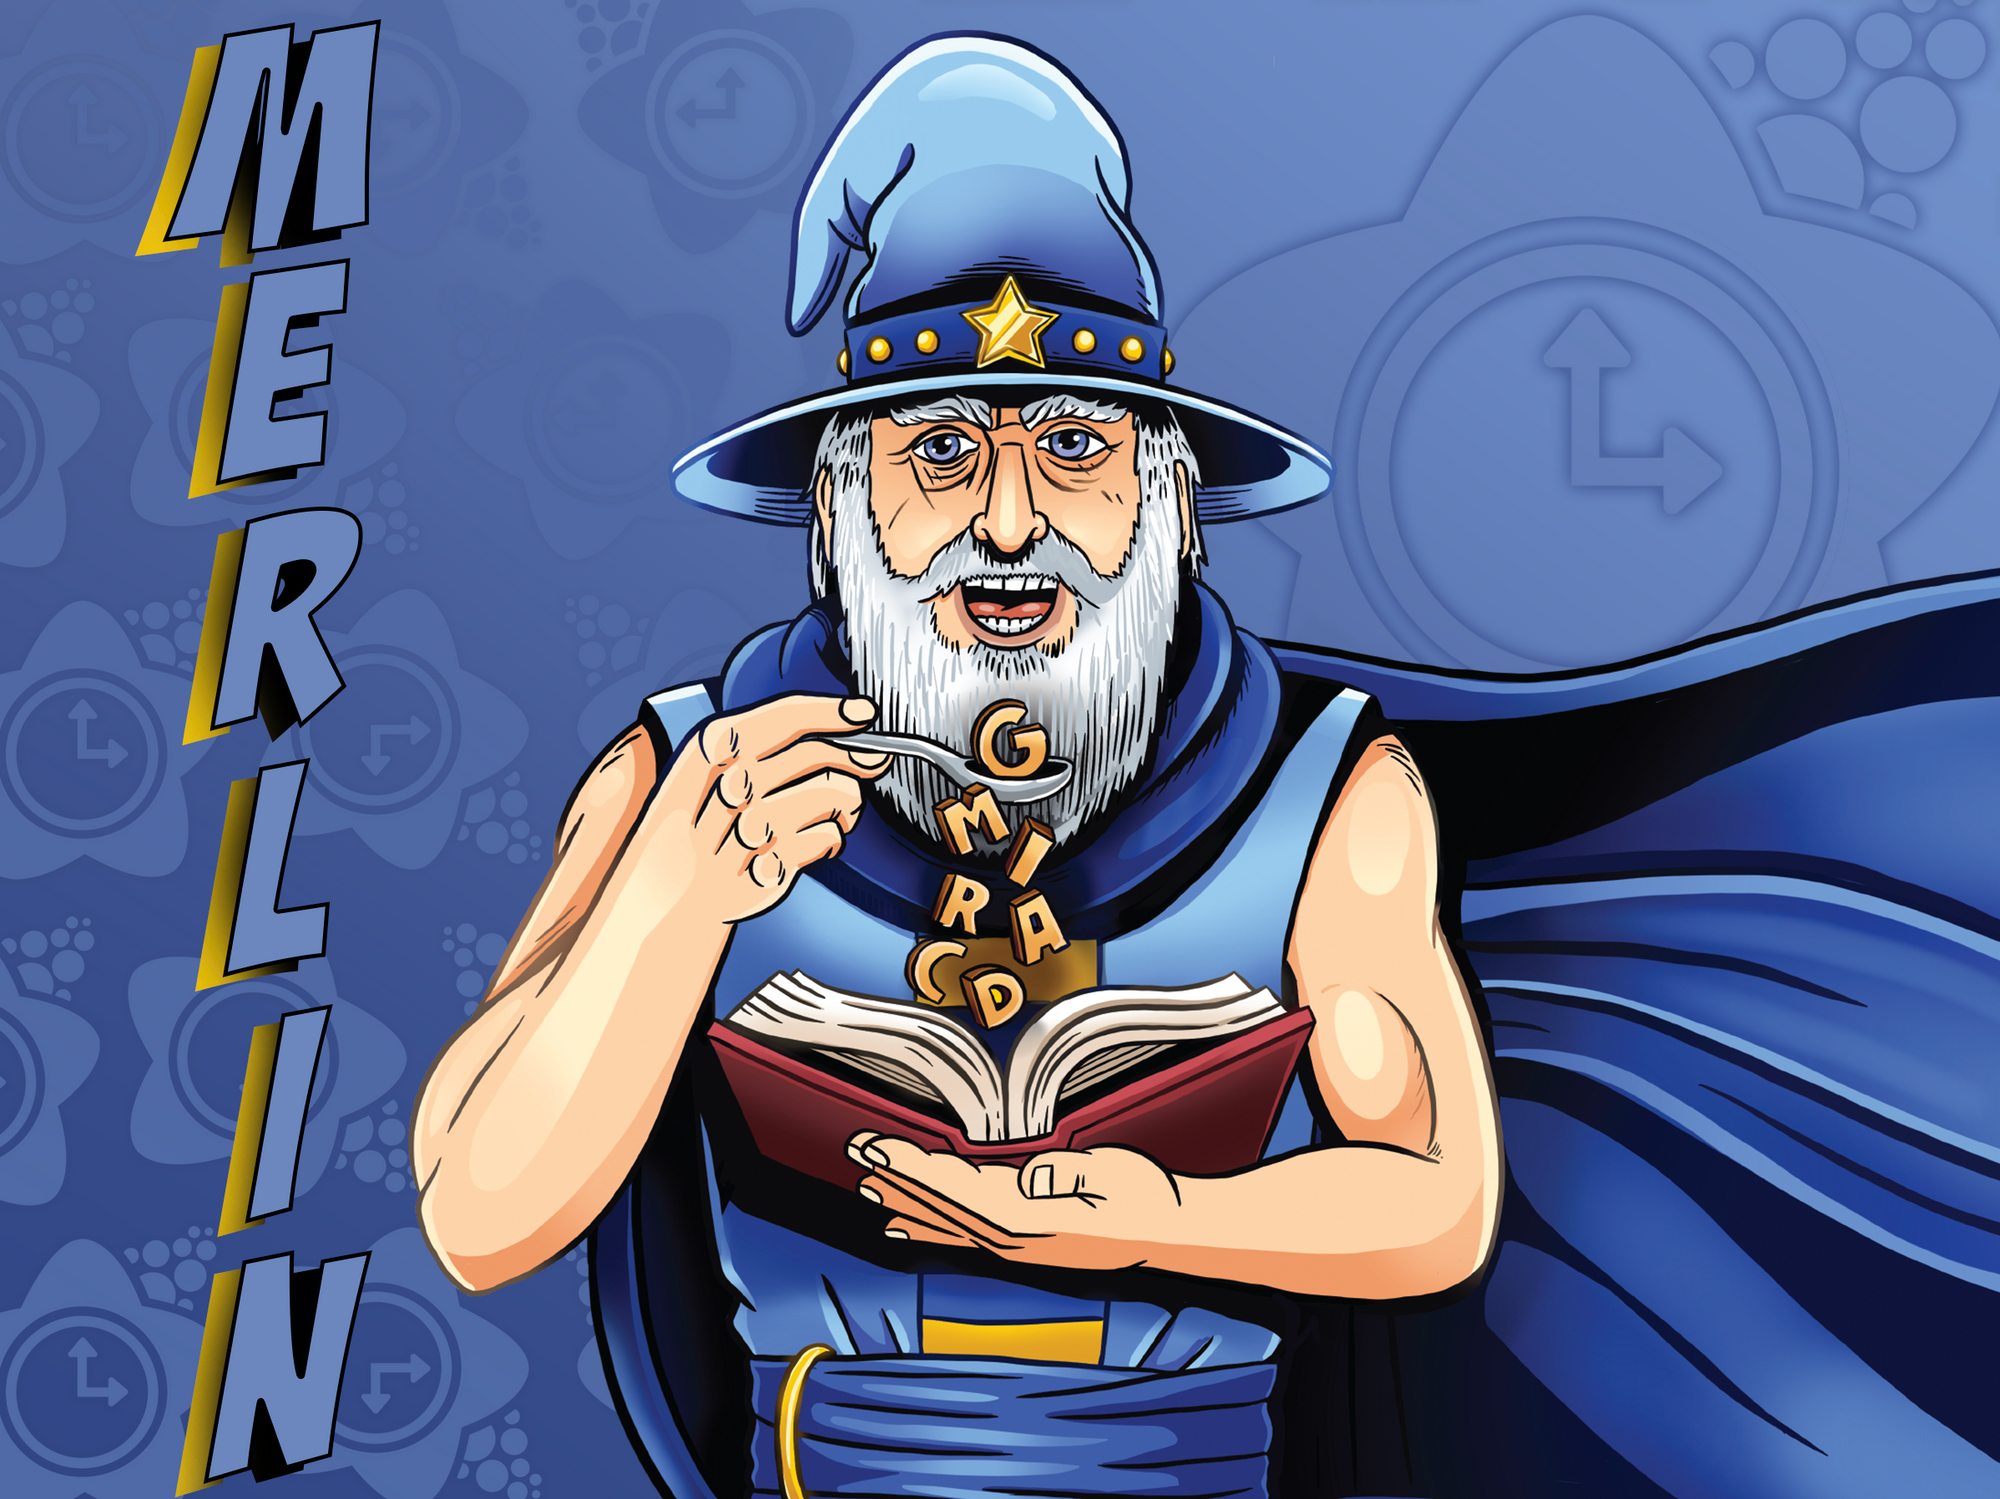 Comic style legendary wizard, wearing a sky blue cape and holding a magical book with star and clock icon in background, with name title Merlin